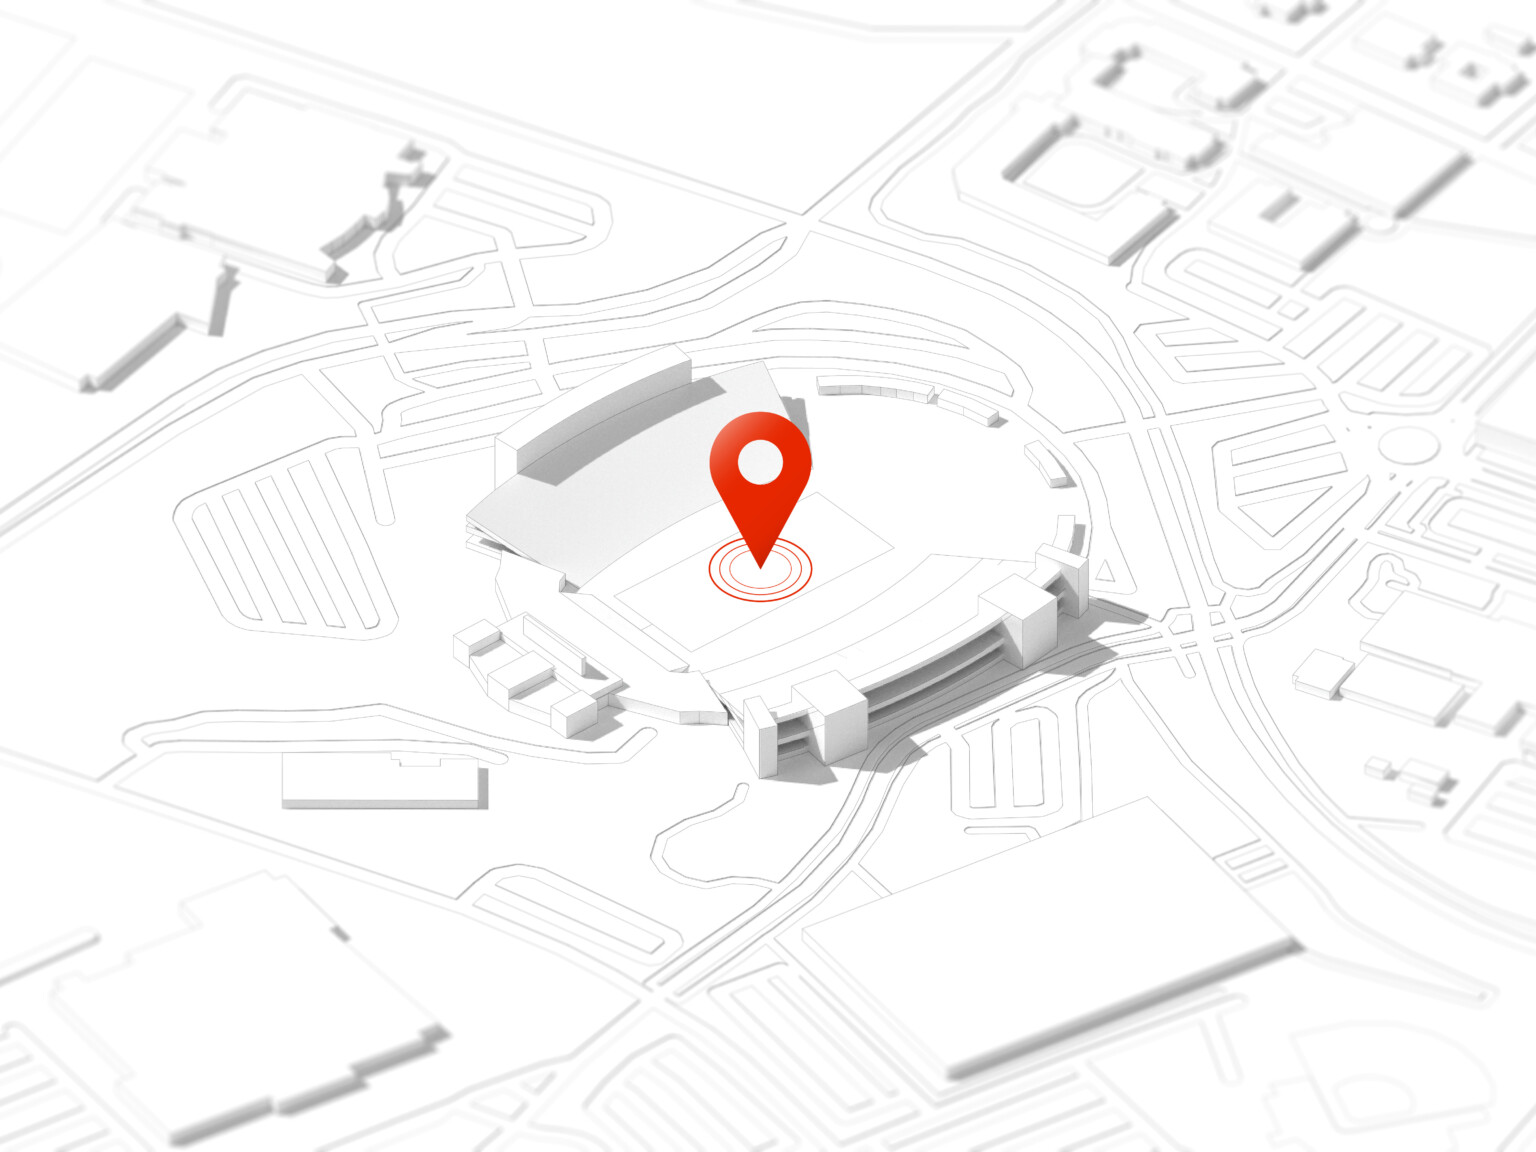 Grey line sketch of a stadium with red circles and a red pinpoint location